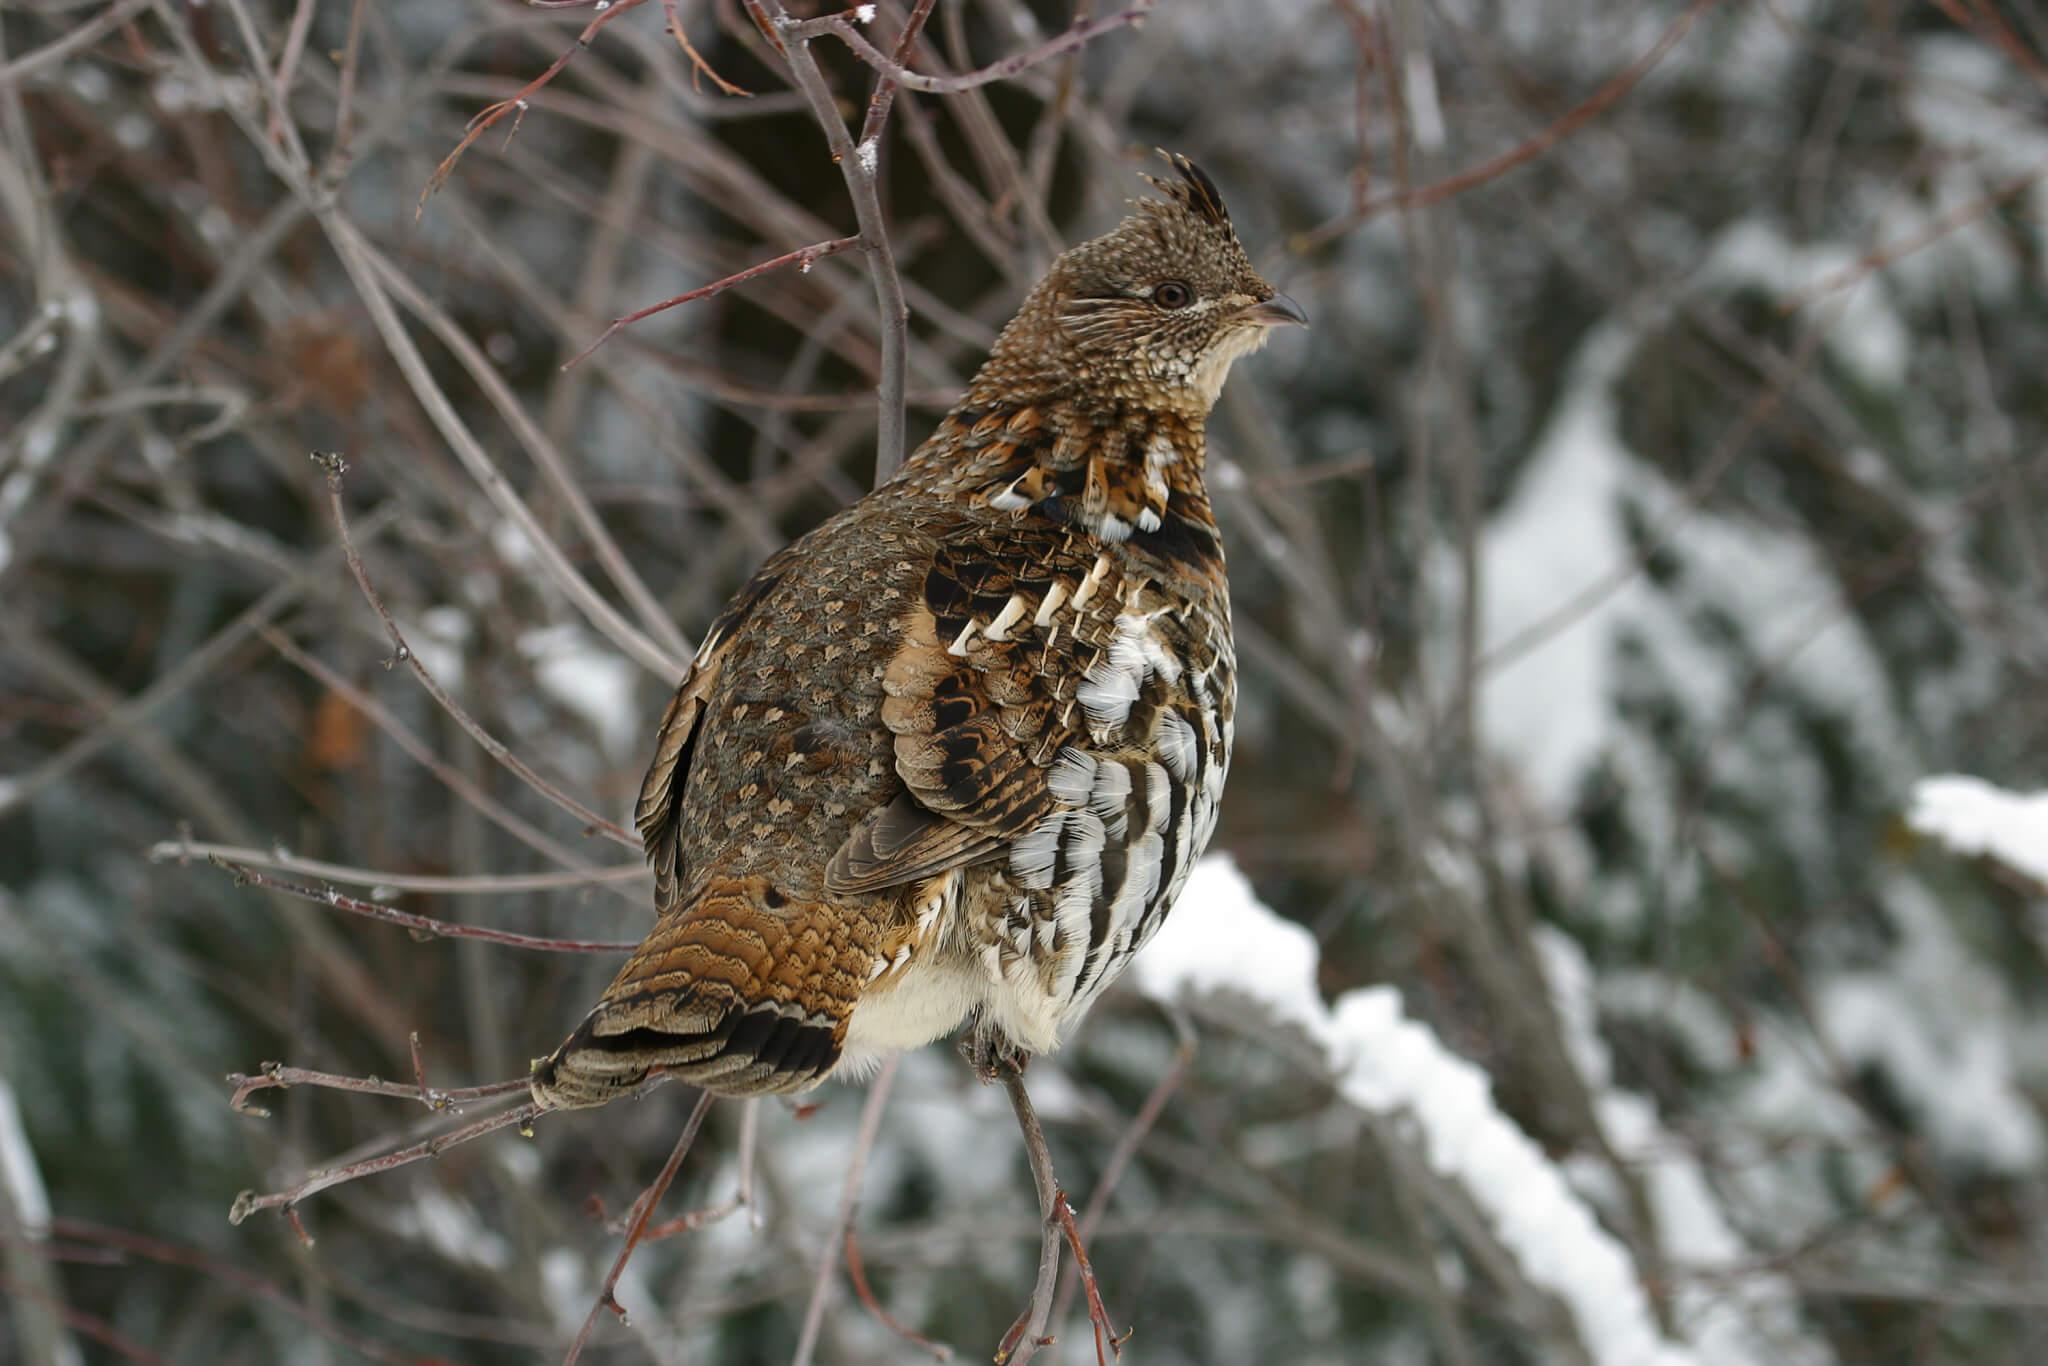 A ruffed grouse perched on a tree, in winter